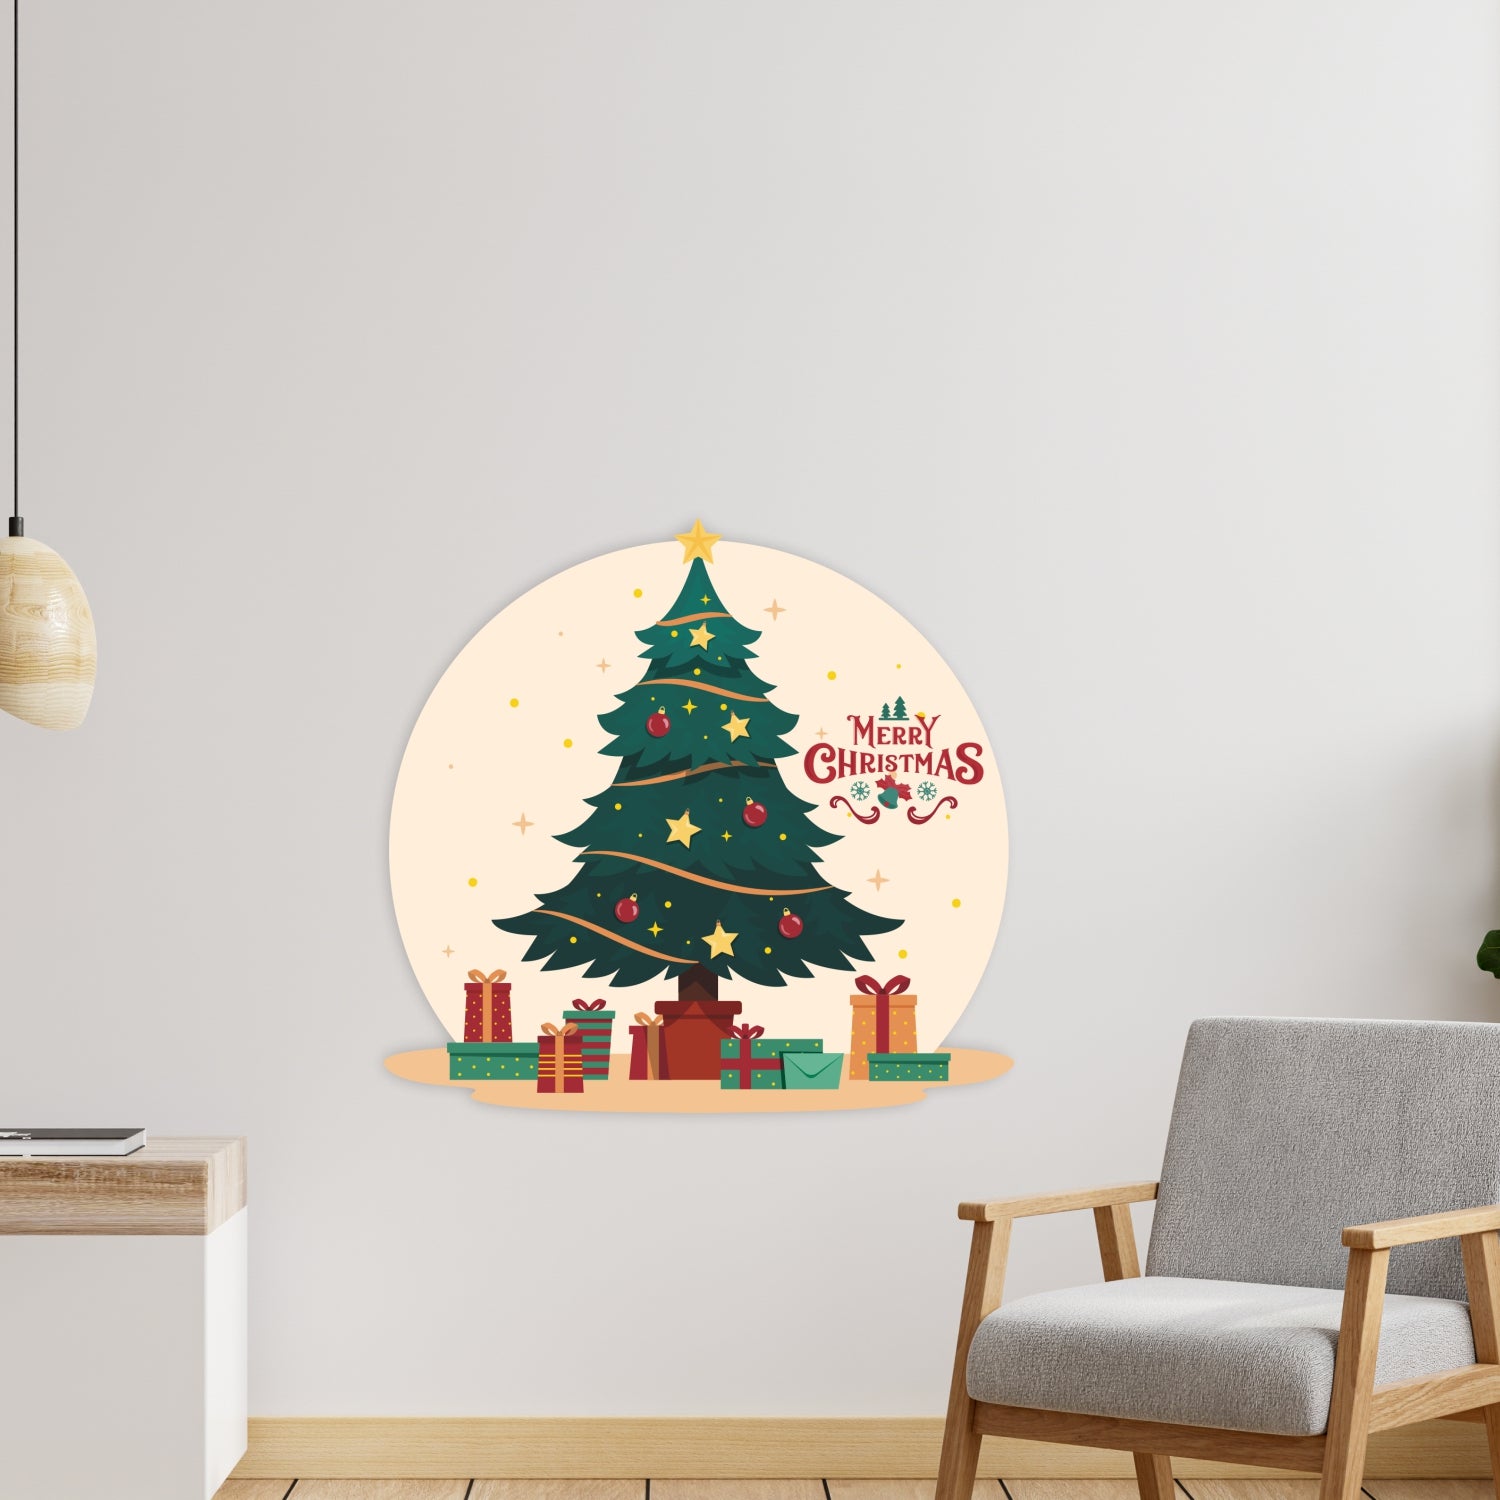 Christmas Wall Sticker for Decoration